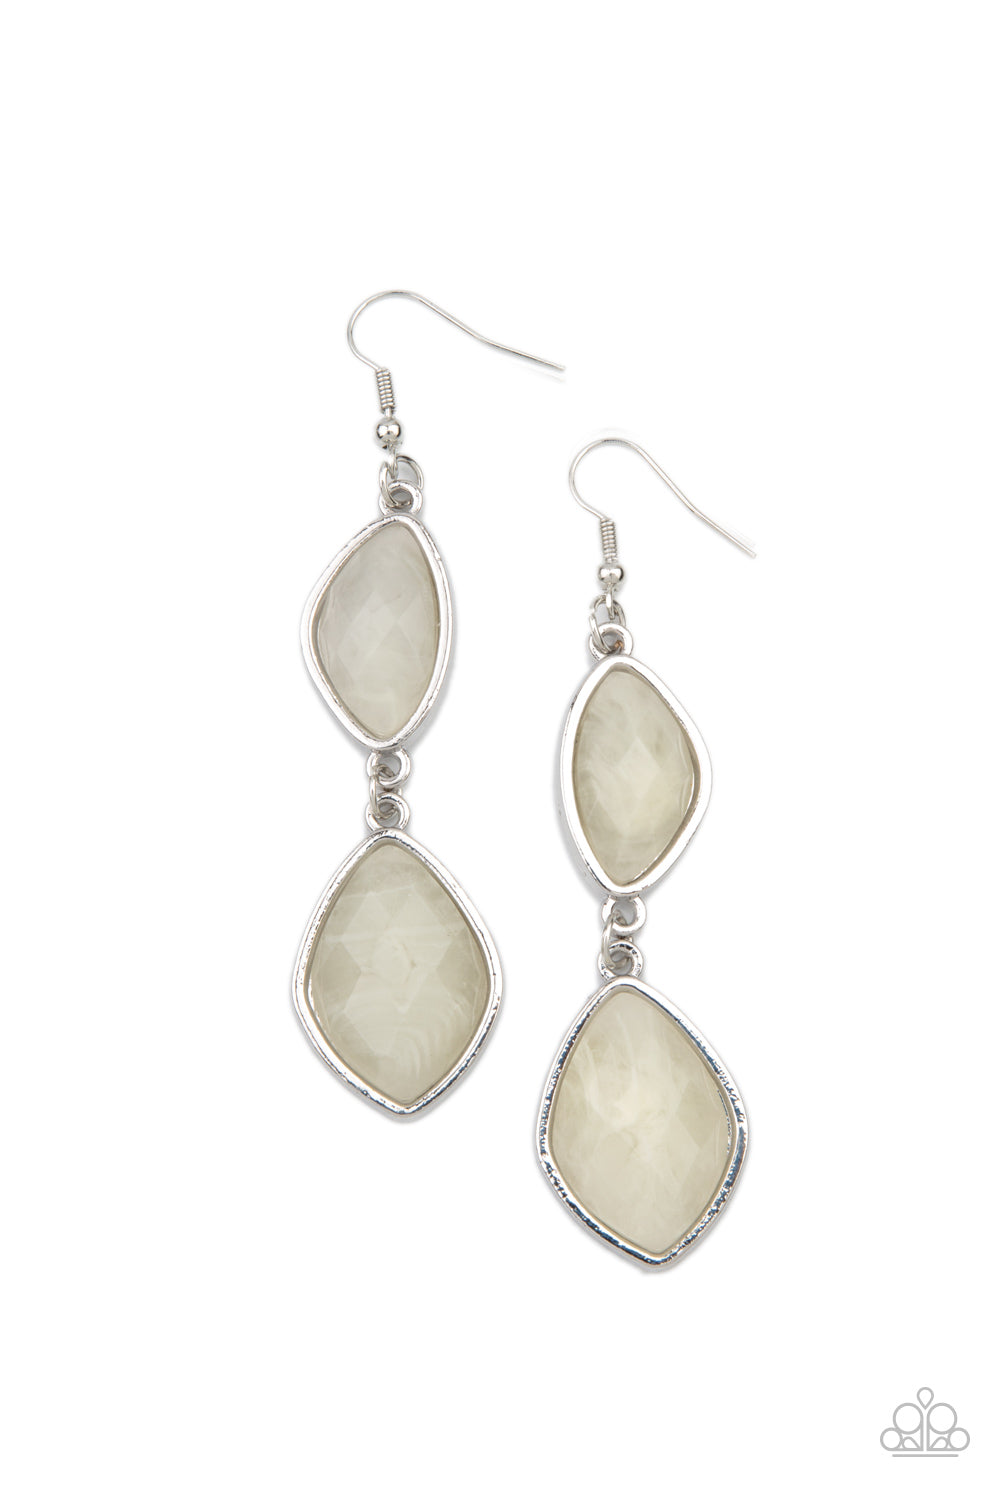 Featuring shimmery faceted surfaces, cloudy faux stone beads are pressed into sleek silver frames that link into a whimsically refined lure. Earring attaches to a standard fishhook fitting.